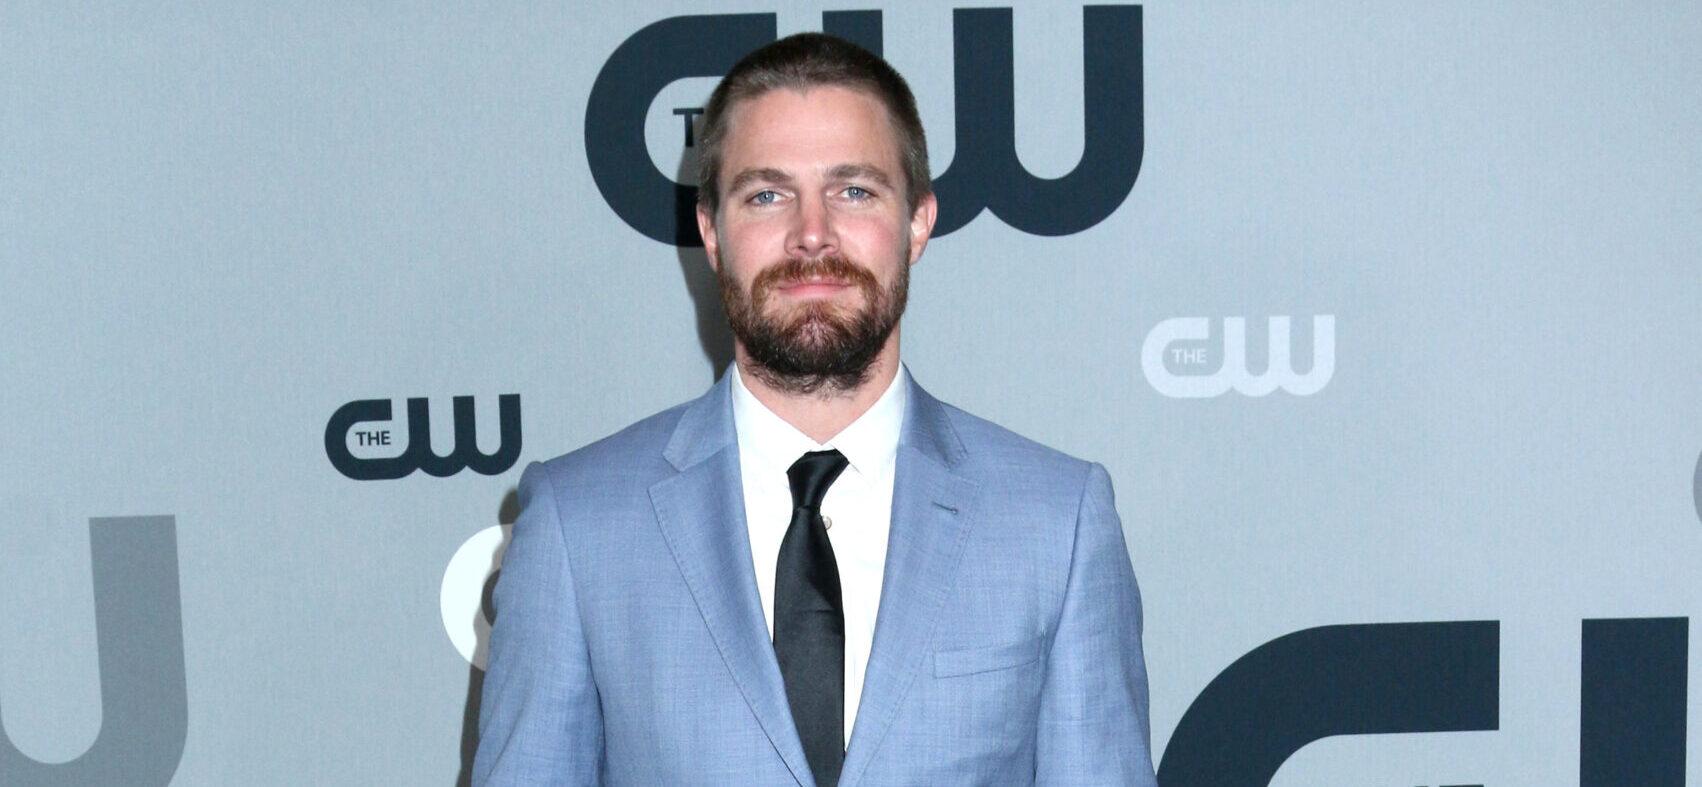 Stephen Amell, best known for his role in "Arrow", is asking the public for help in locating a dear friend of his who has been missing.